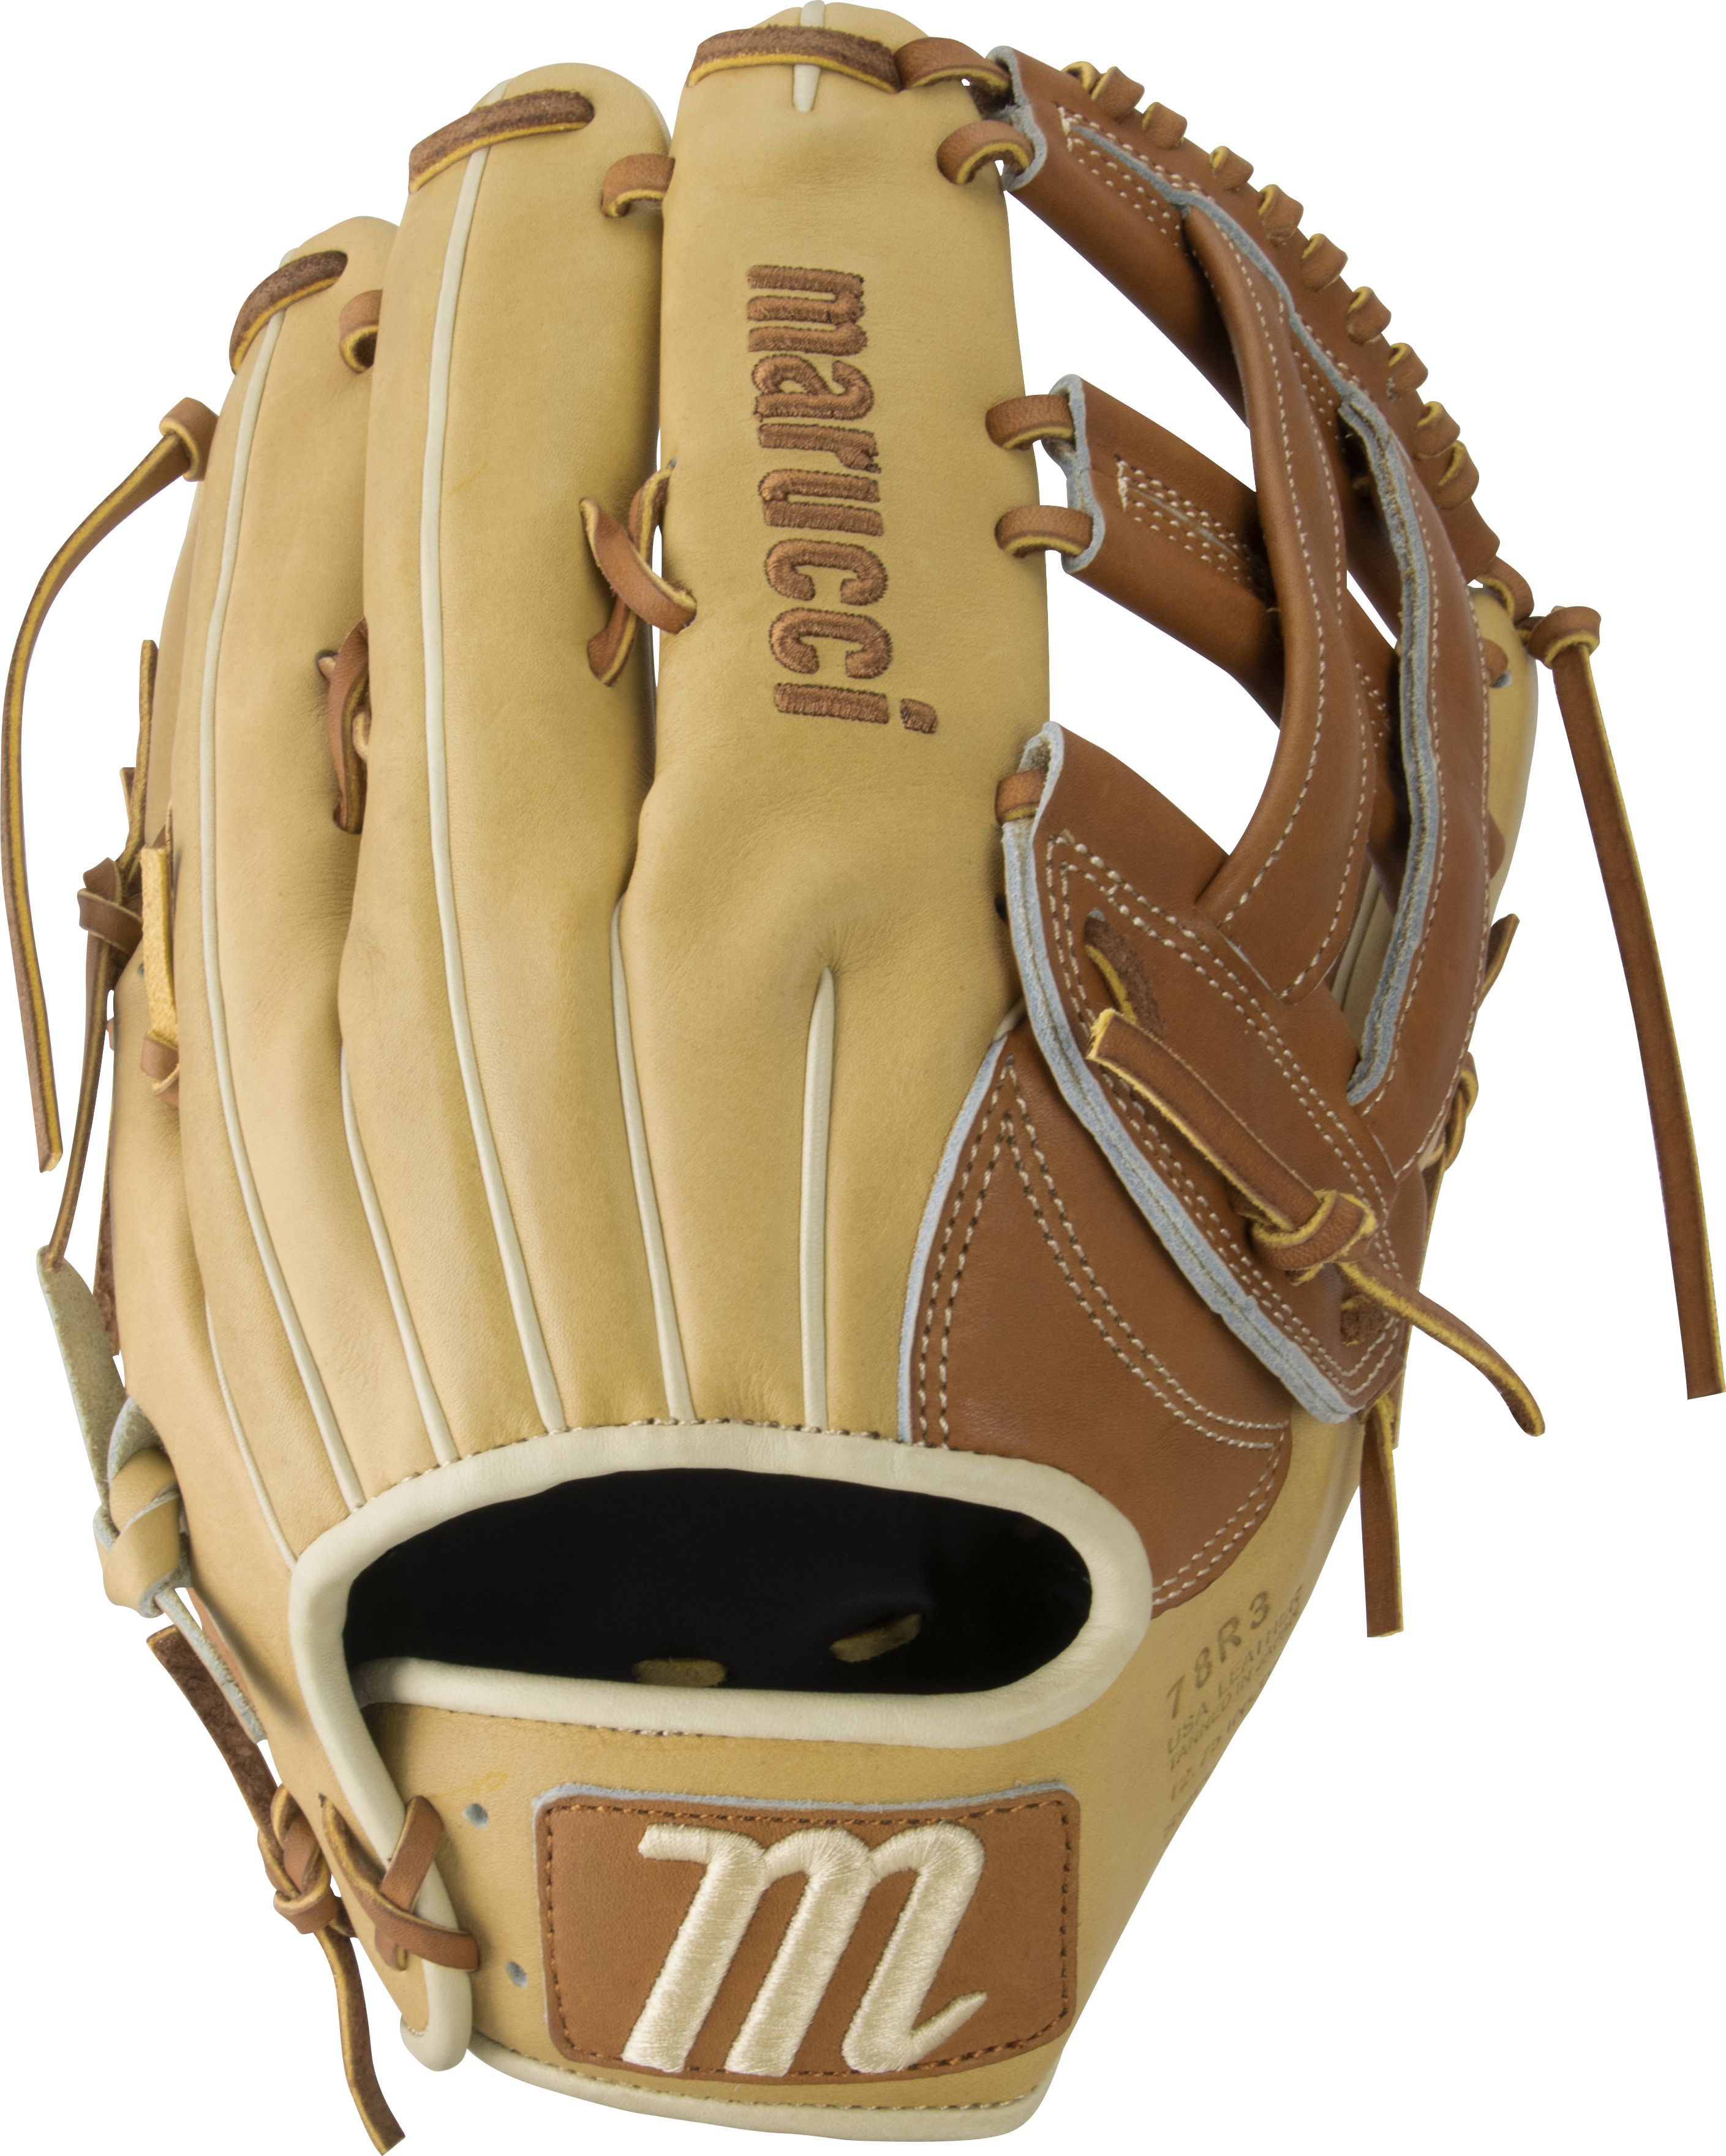 • Premium Japanese-tanned steerhide leather provides stiffness and rugged durability • Extra-smooth cowhide lining with padding-wrapped thumb and pinky loops • Professional-grade USA rawhide laces from Tennessee Tanning Co. • Moisture-wicking mesh wrist lining with added padding.